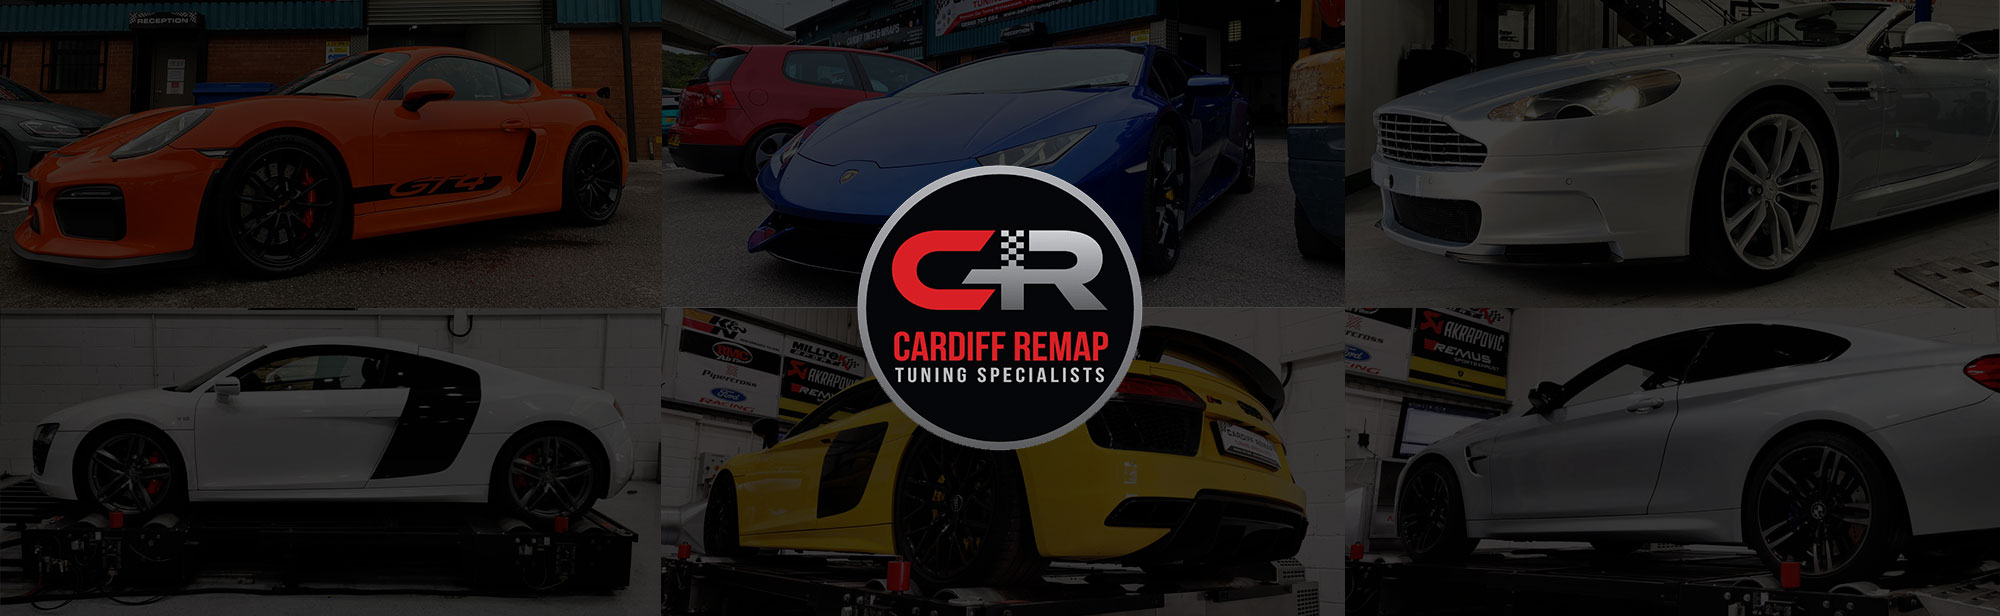 remapping services cardiff